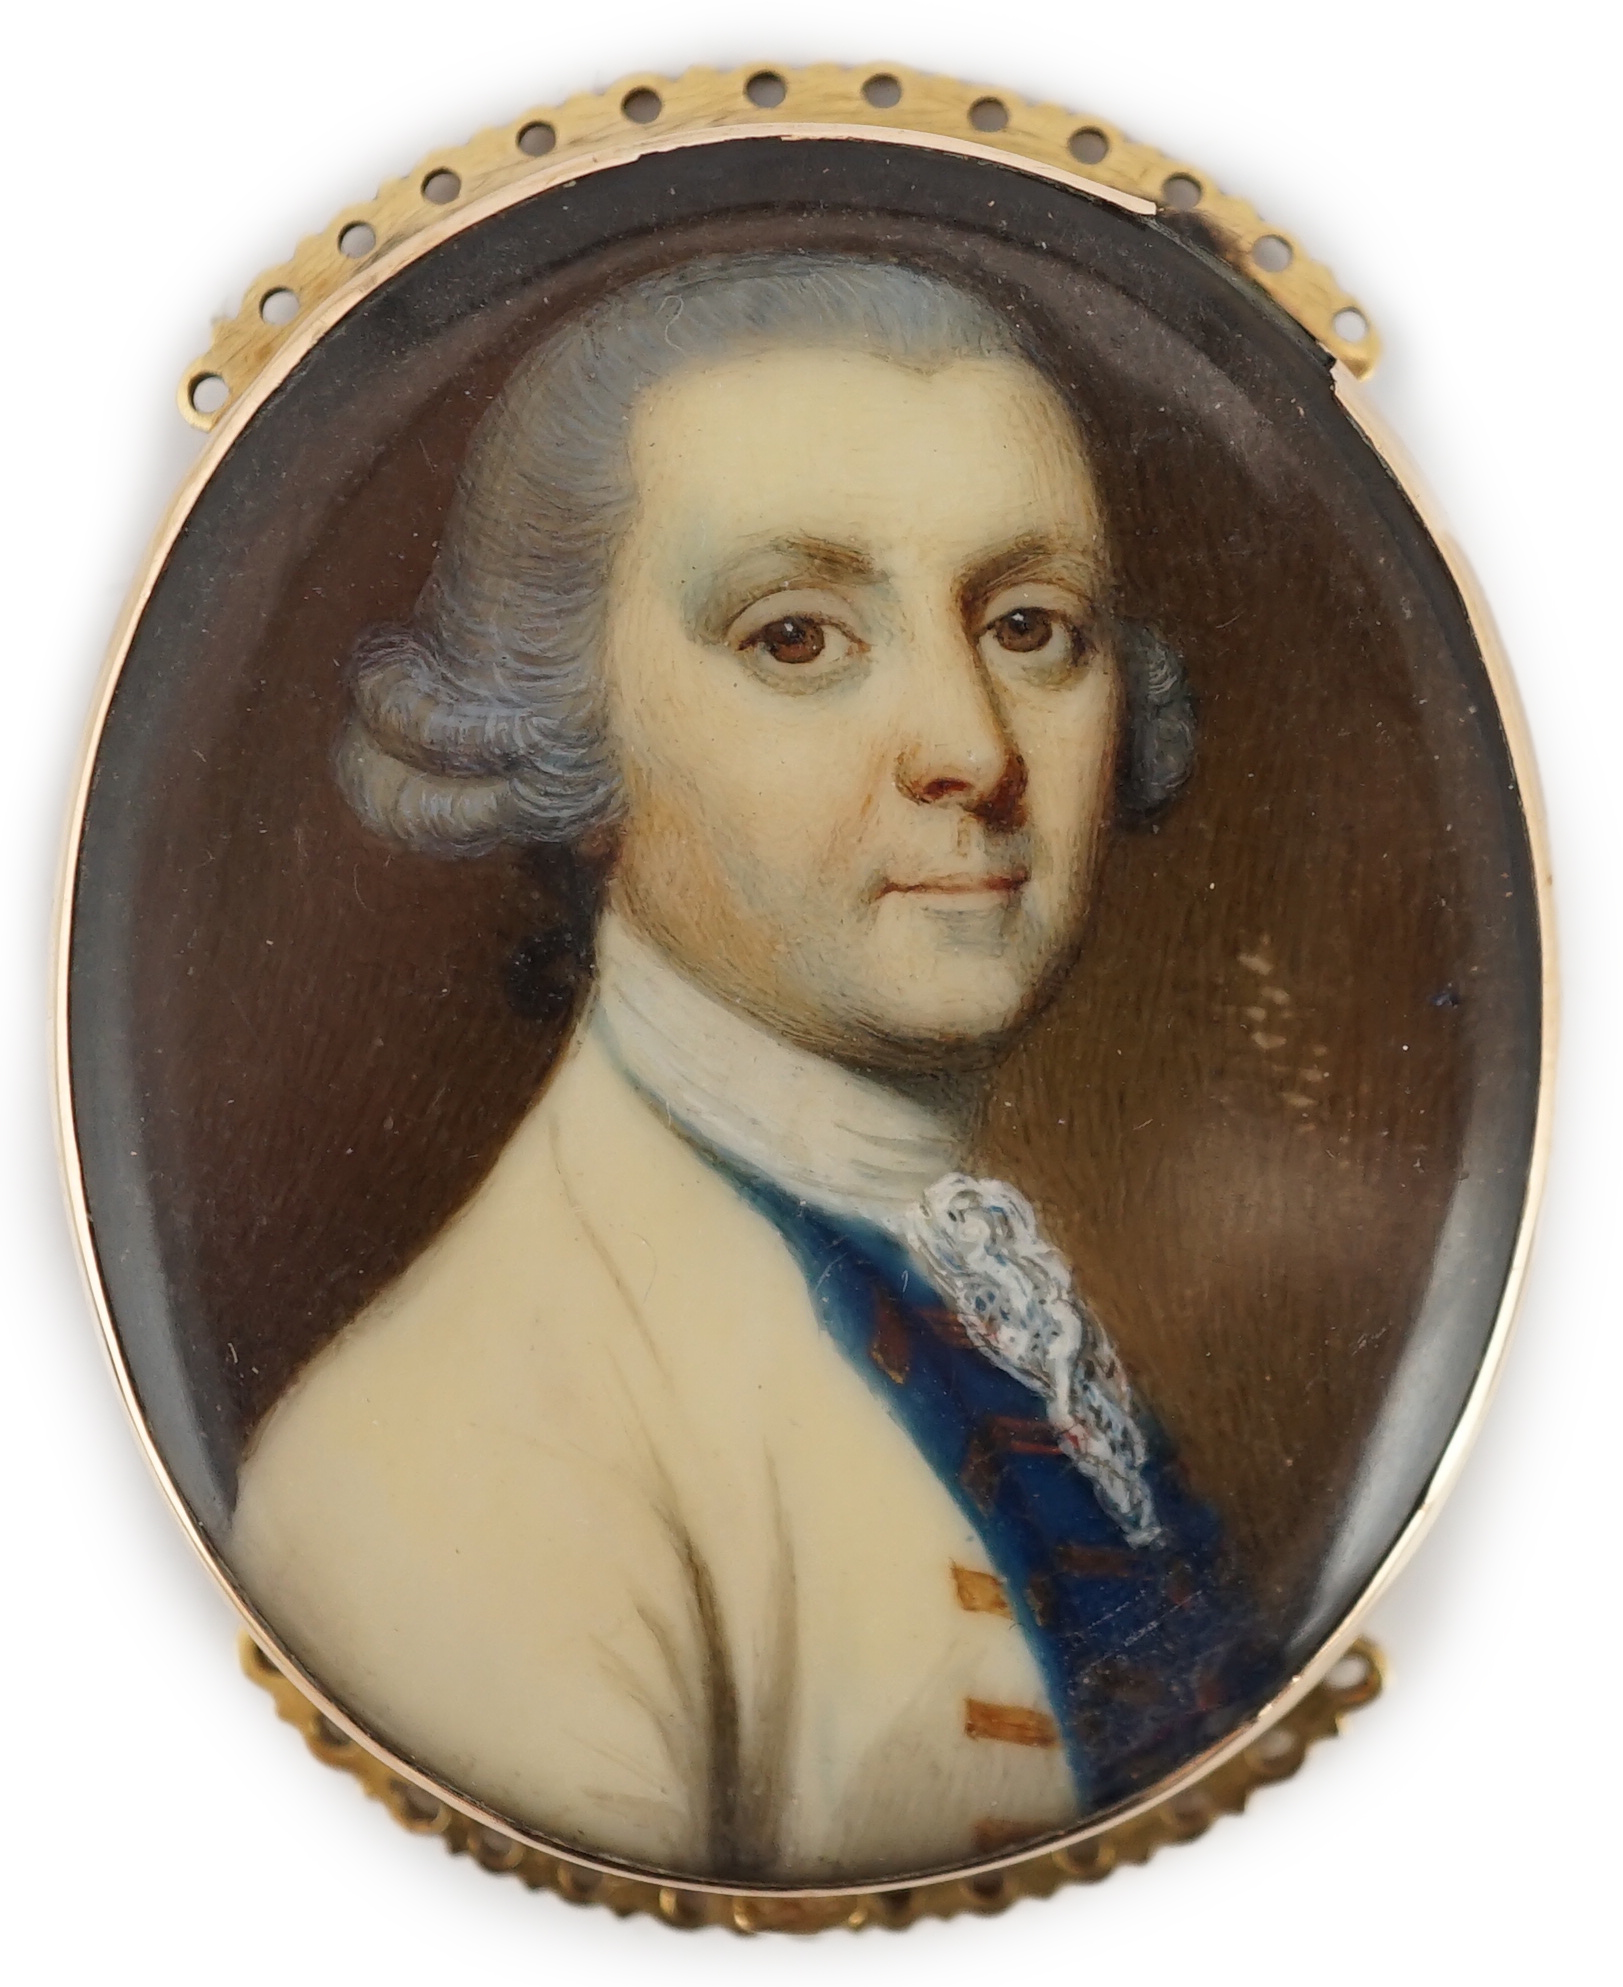 Jeremiah Meyer, R.A. (Anglo-German, 1735-1789), Portrait miniature of a gentleman, oil on ivory, 3.6 x 3.1cm. CITES Submission reference LZQ4BYUR